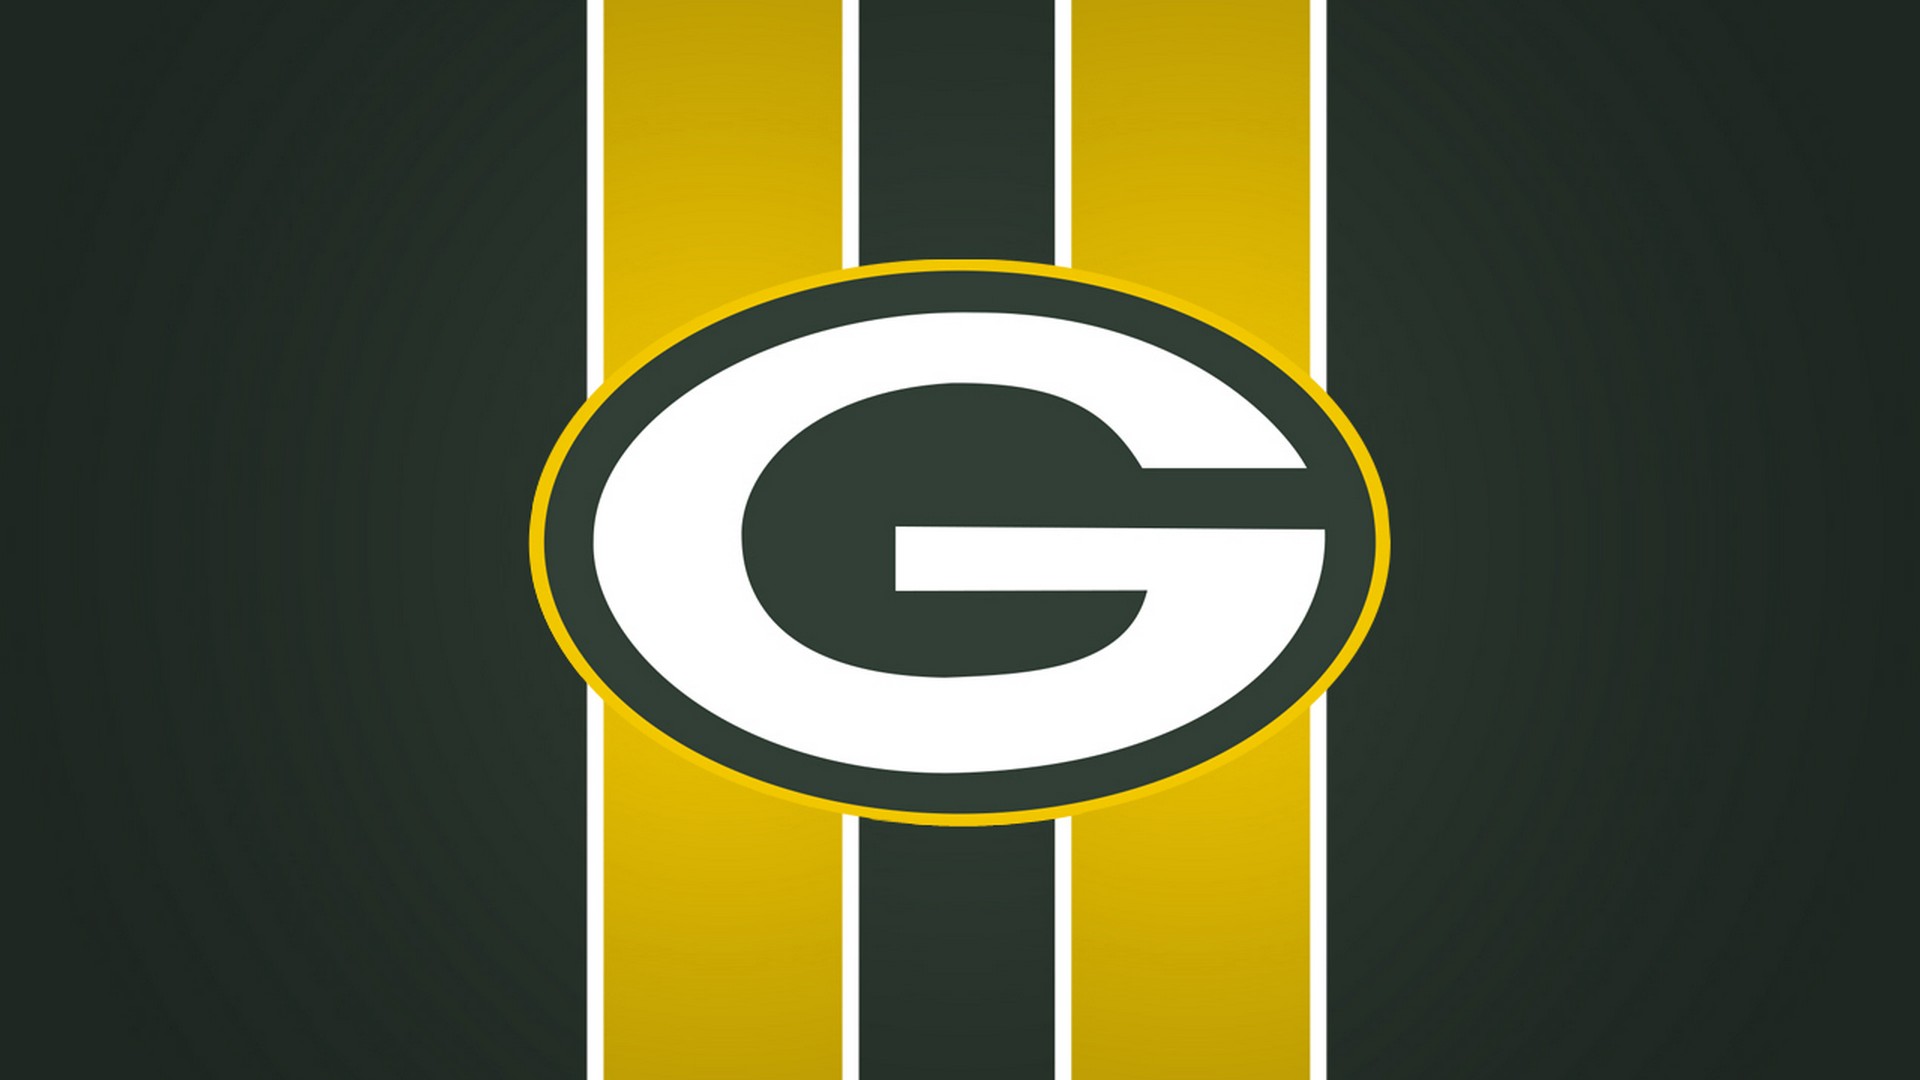 Green Bay Packers NFL For Desktop Wallpaper With Resolution 1920X1080 pixel. You can make this wallpaper for your Mac or Windows Desktop Background, iPhone, Android or Tablet and another Smartphone device for free